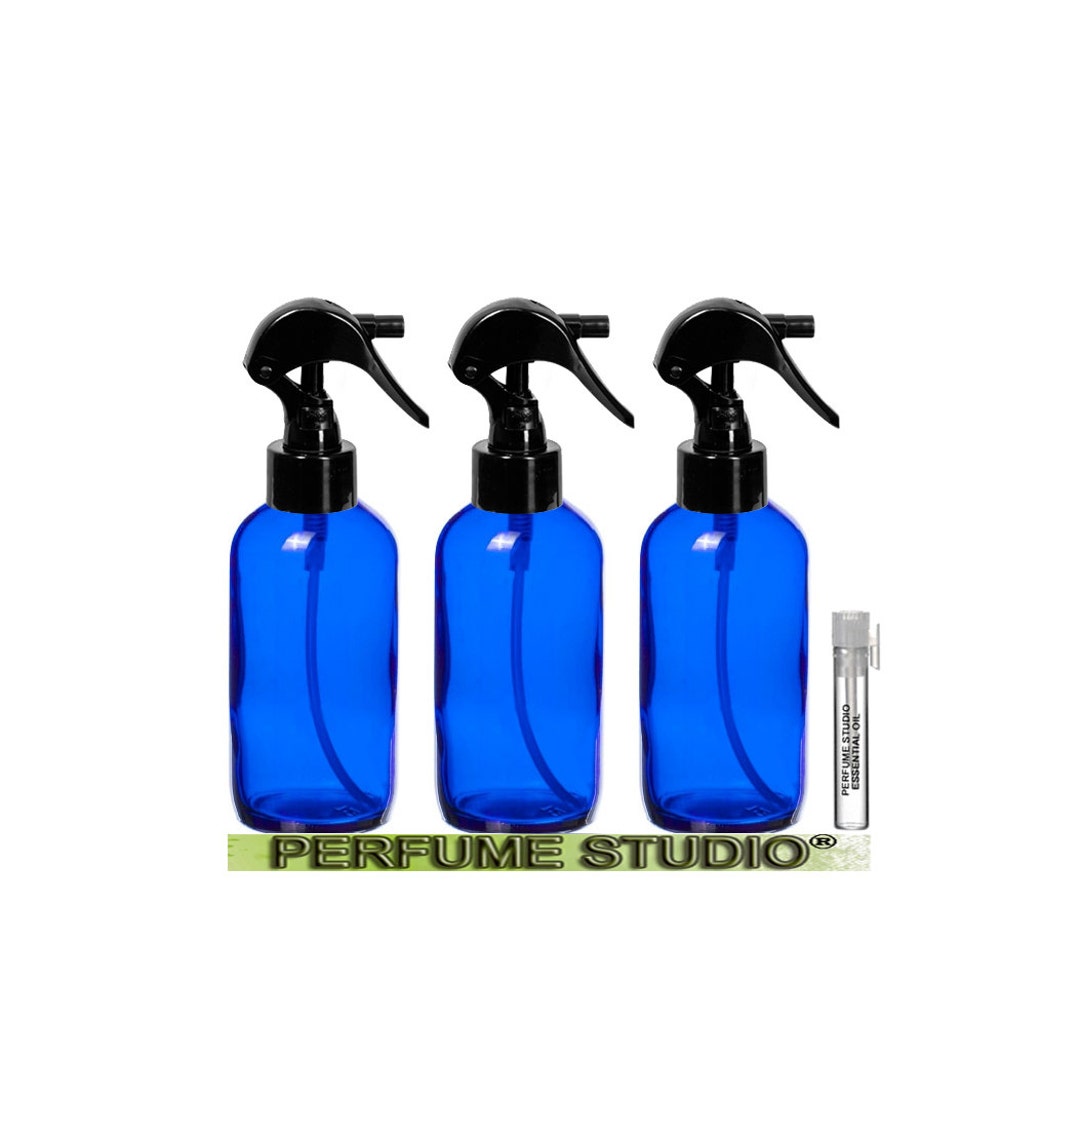 Perfume Studio Fragrance Oil for Soap Making, Candle Making